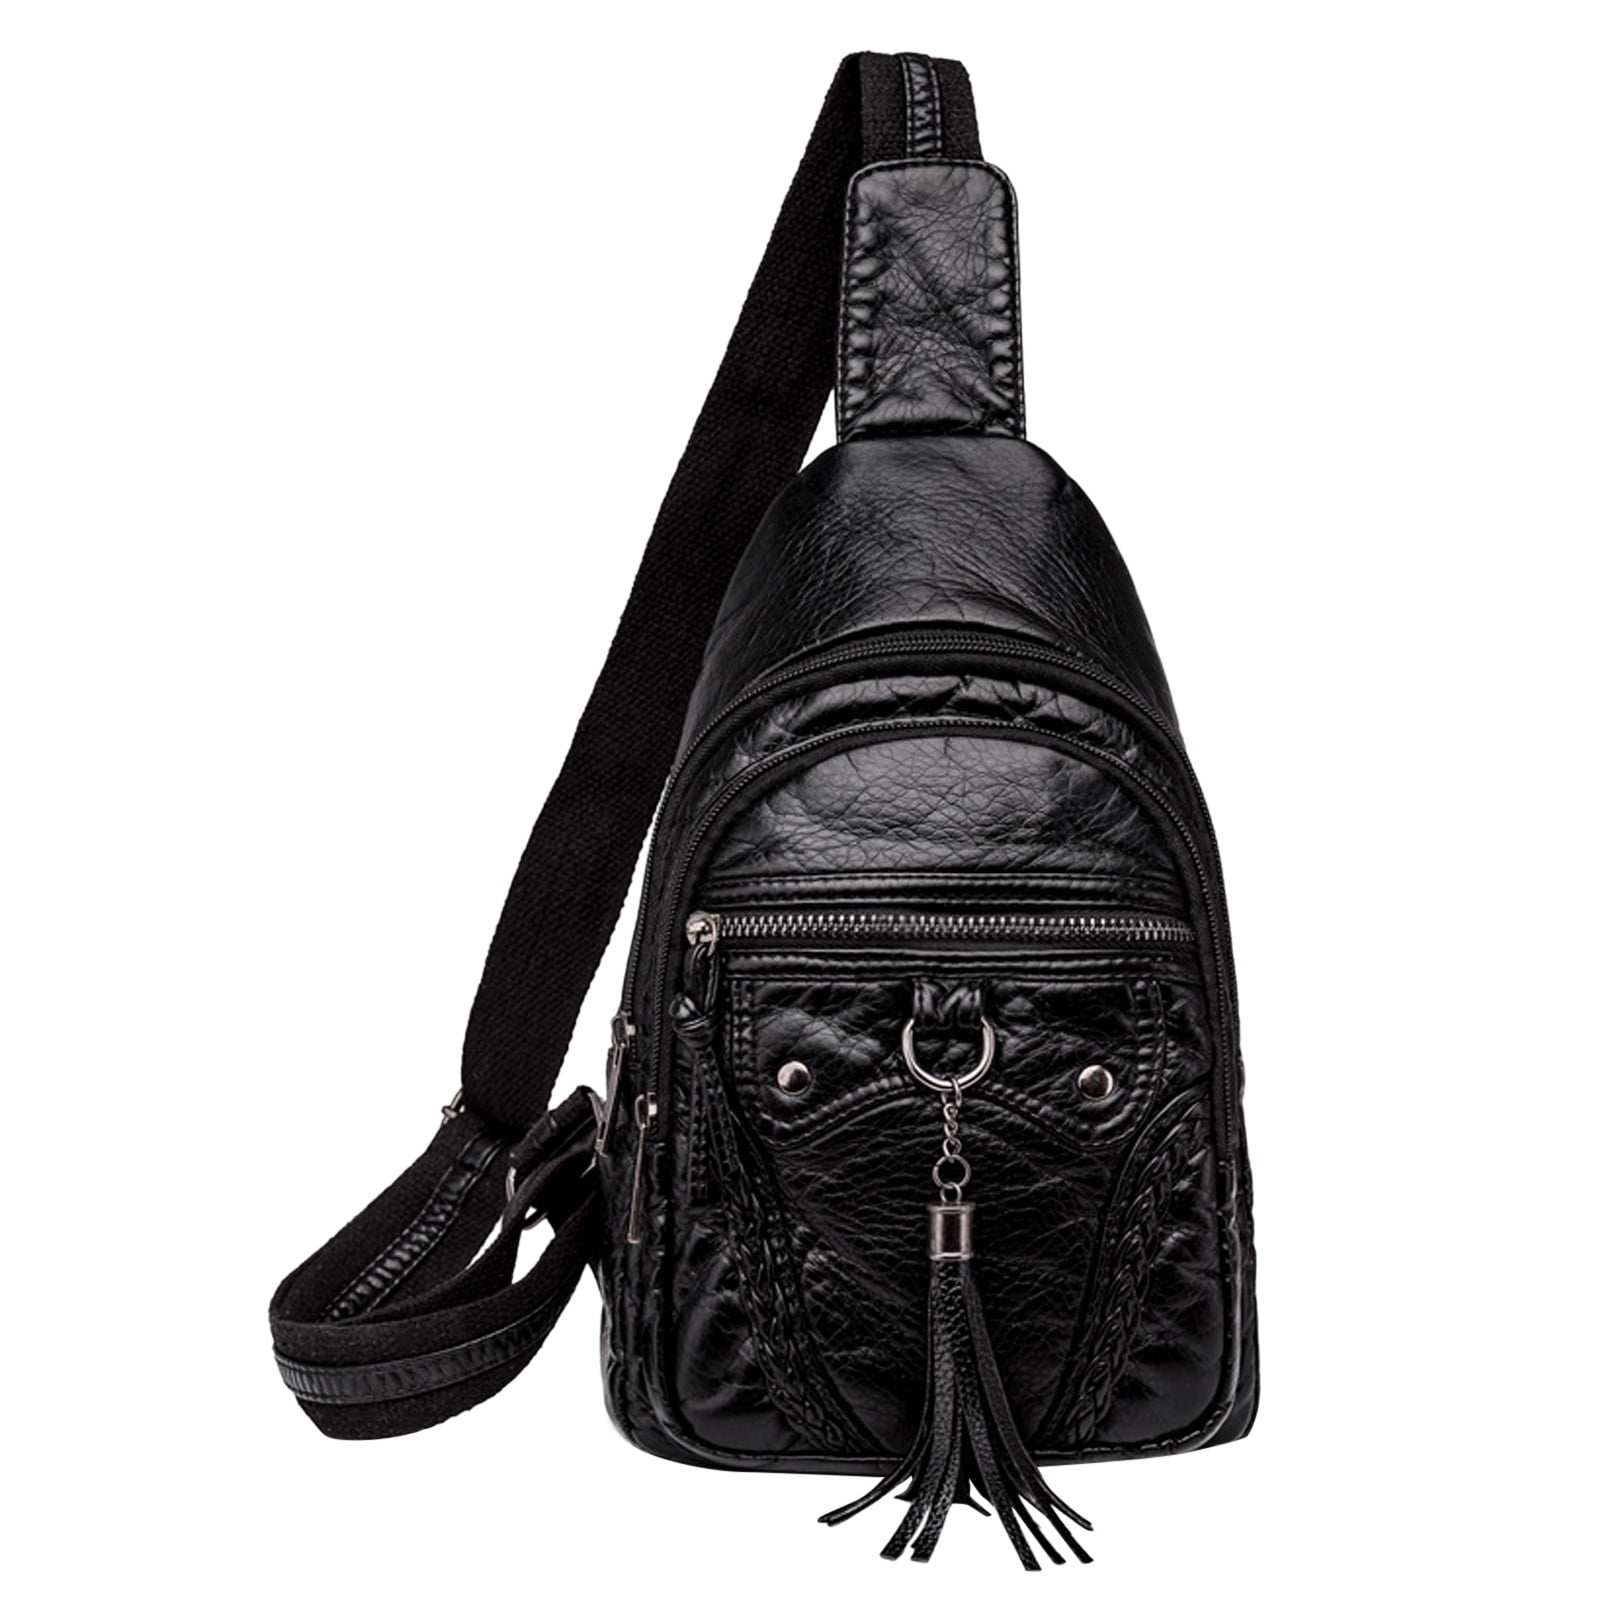 Buy Mini backpack Fashion for everyday crossbody and over shoulder bag  travel purse Black Grand Sierra Designs at Amazon.in